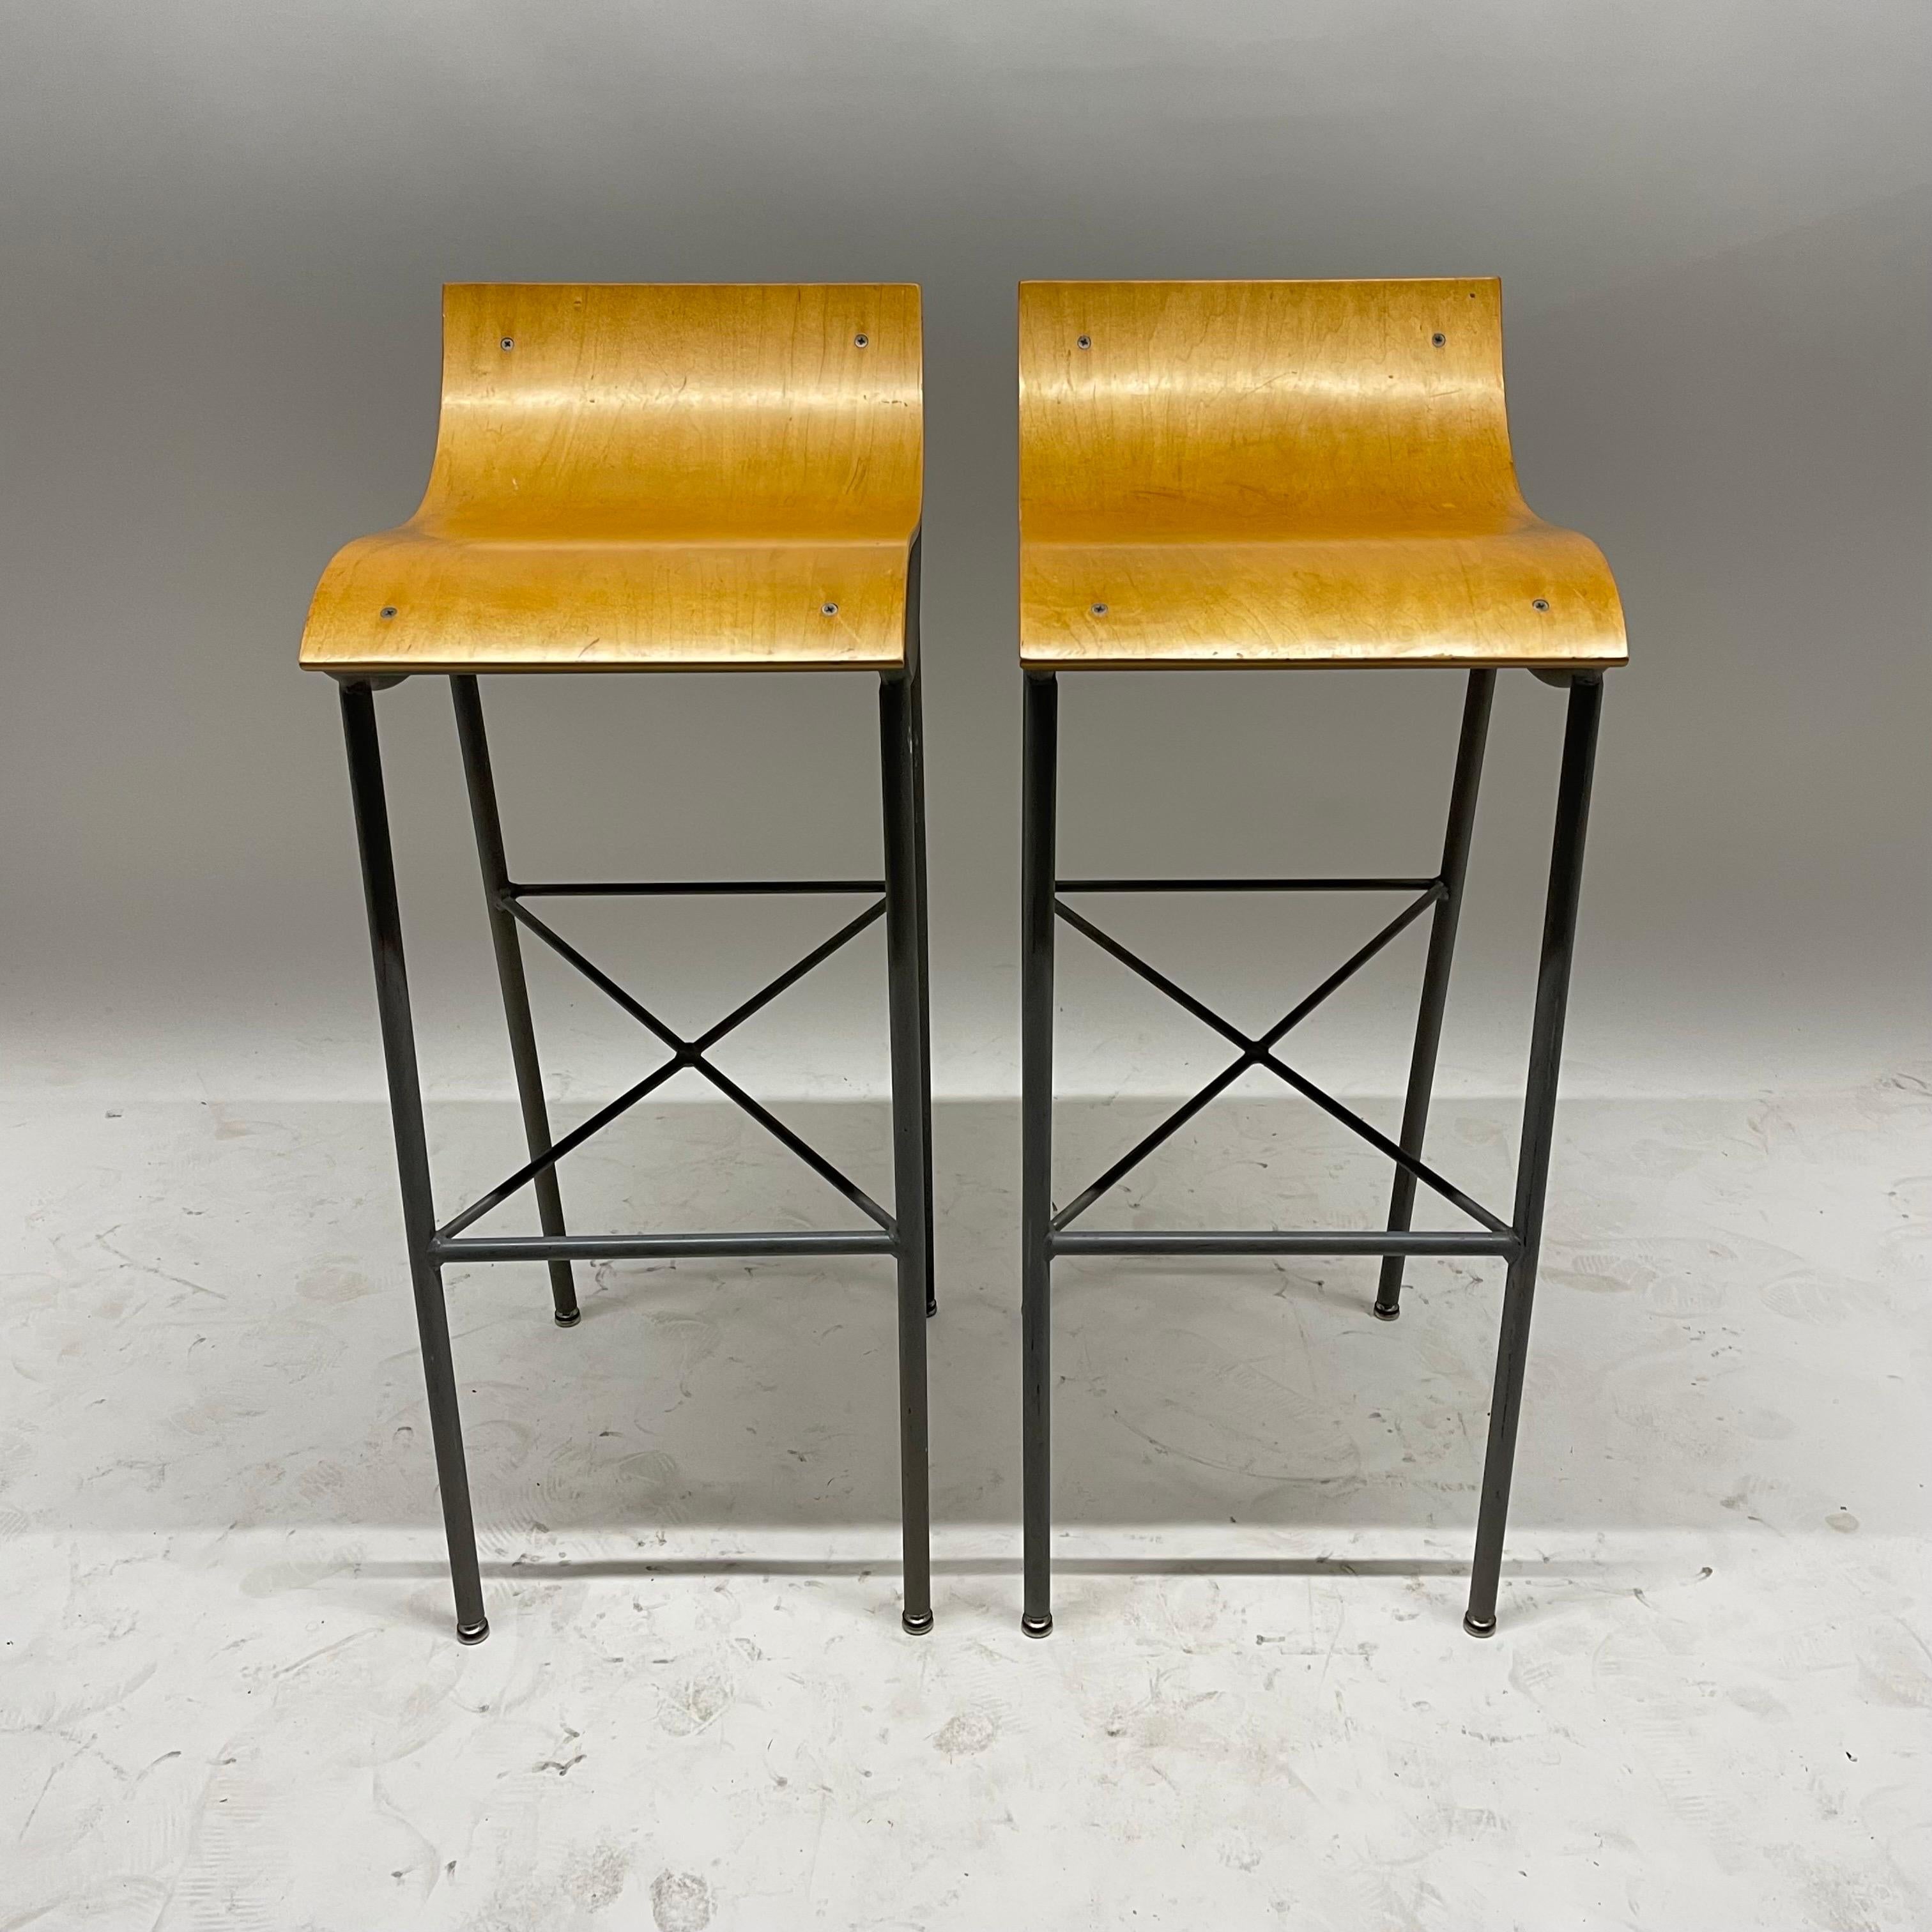 20th Century Pair of Post Modern Sculptural Steel and Bent Plywood Bar Stools, circa 1980s For Sale